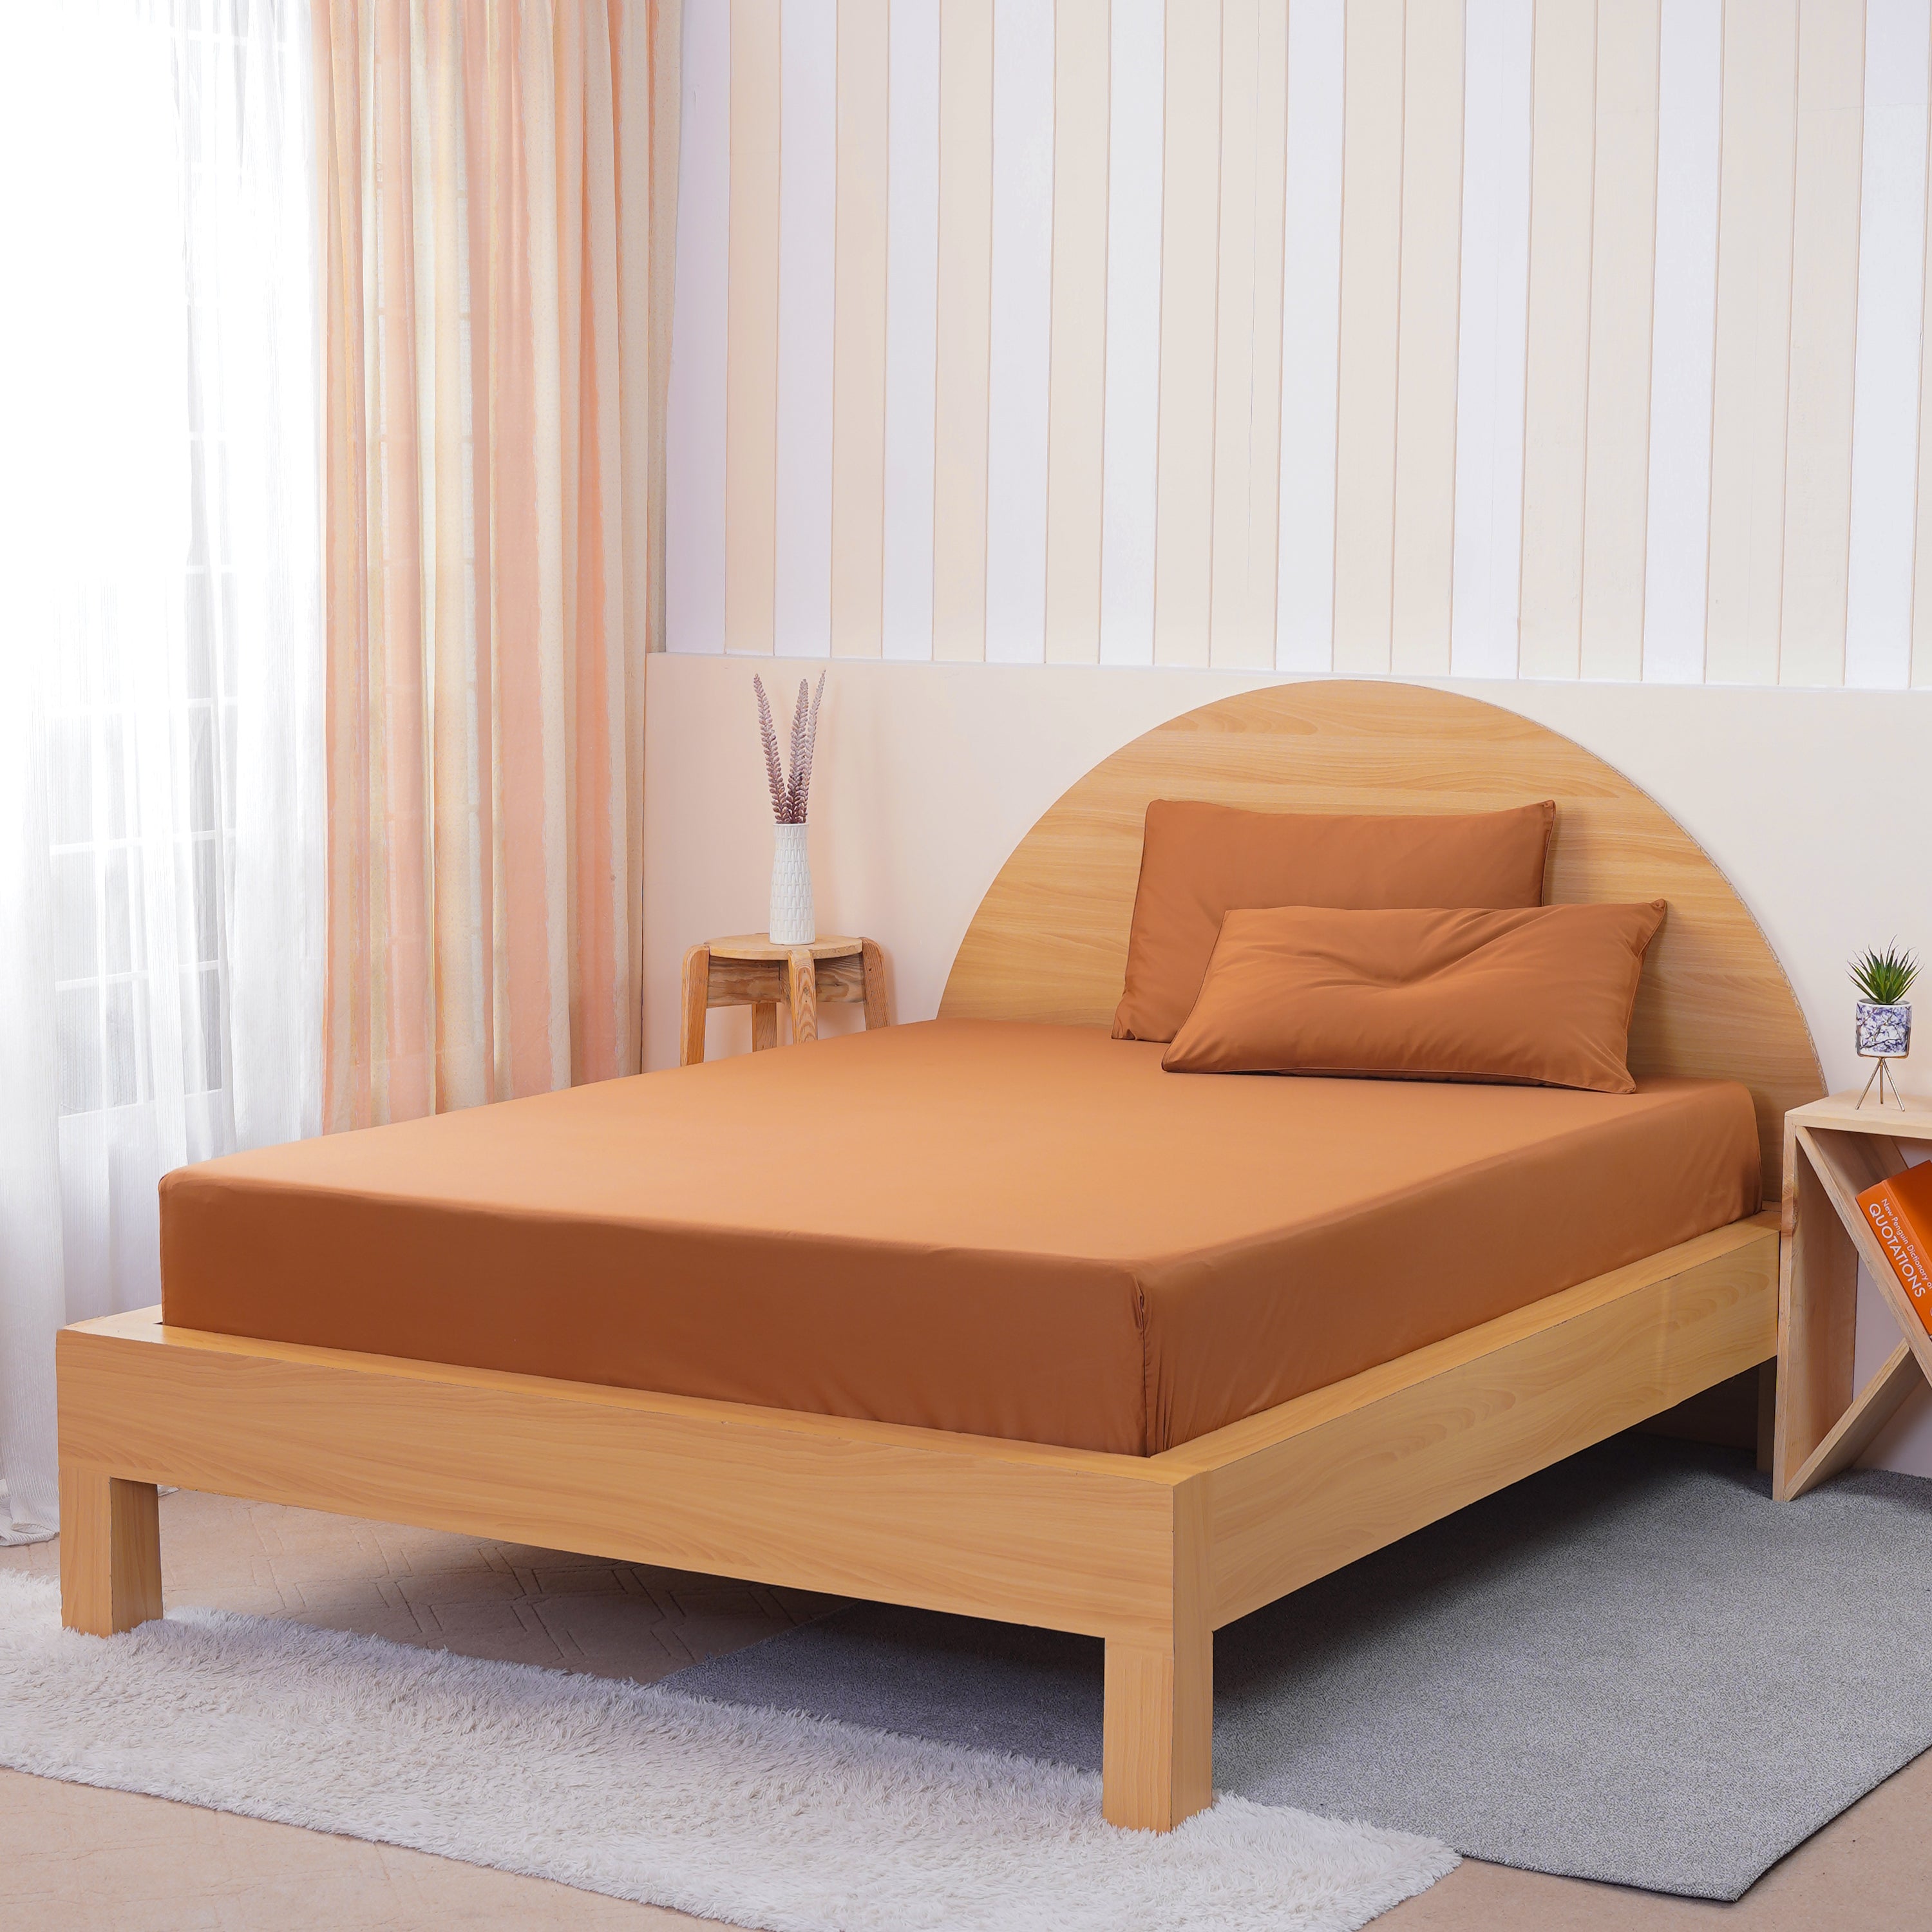 Ackly Bamboo - Terracotta Fitted Sheet